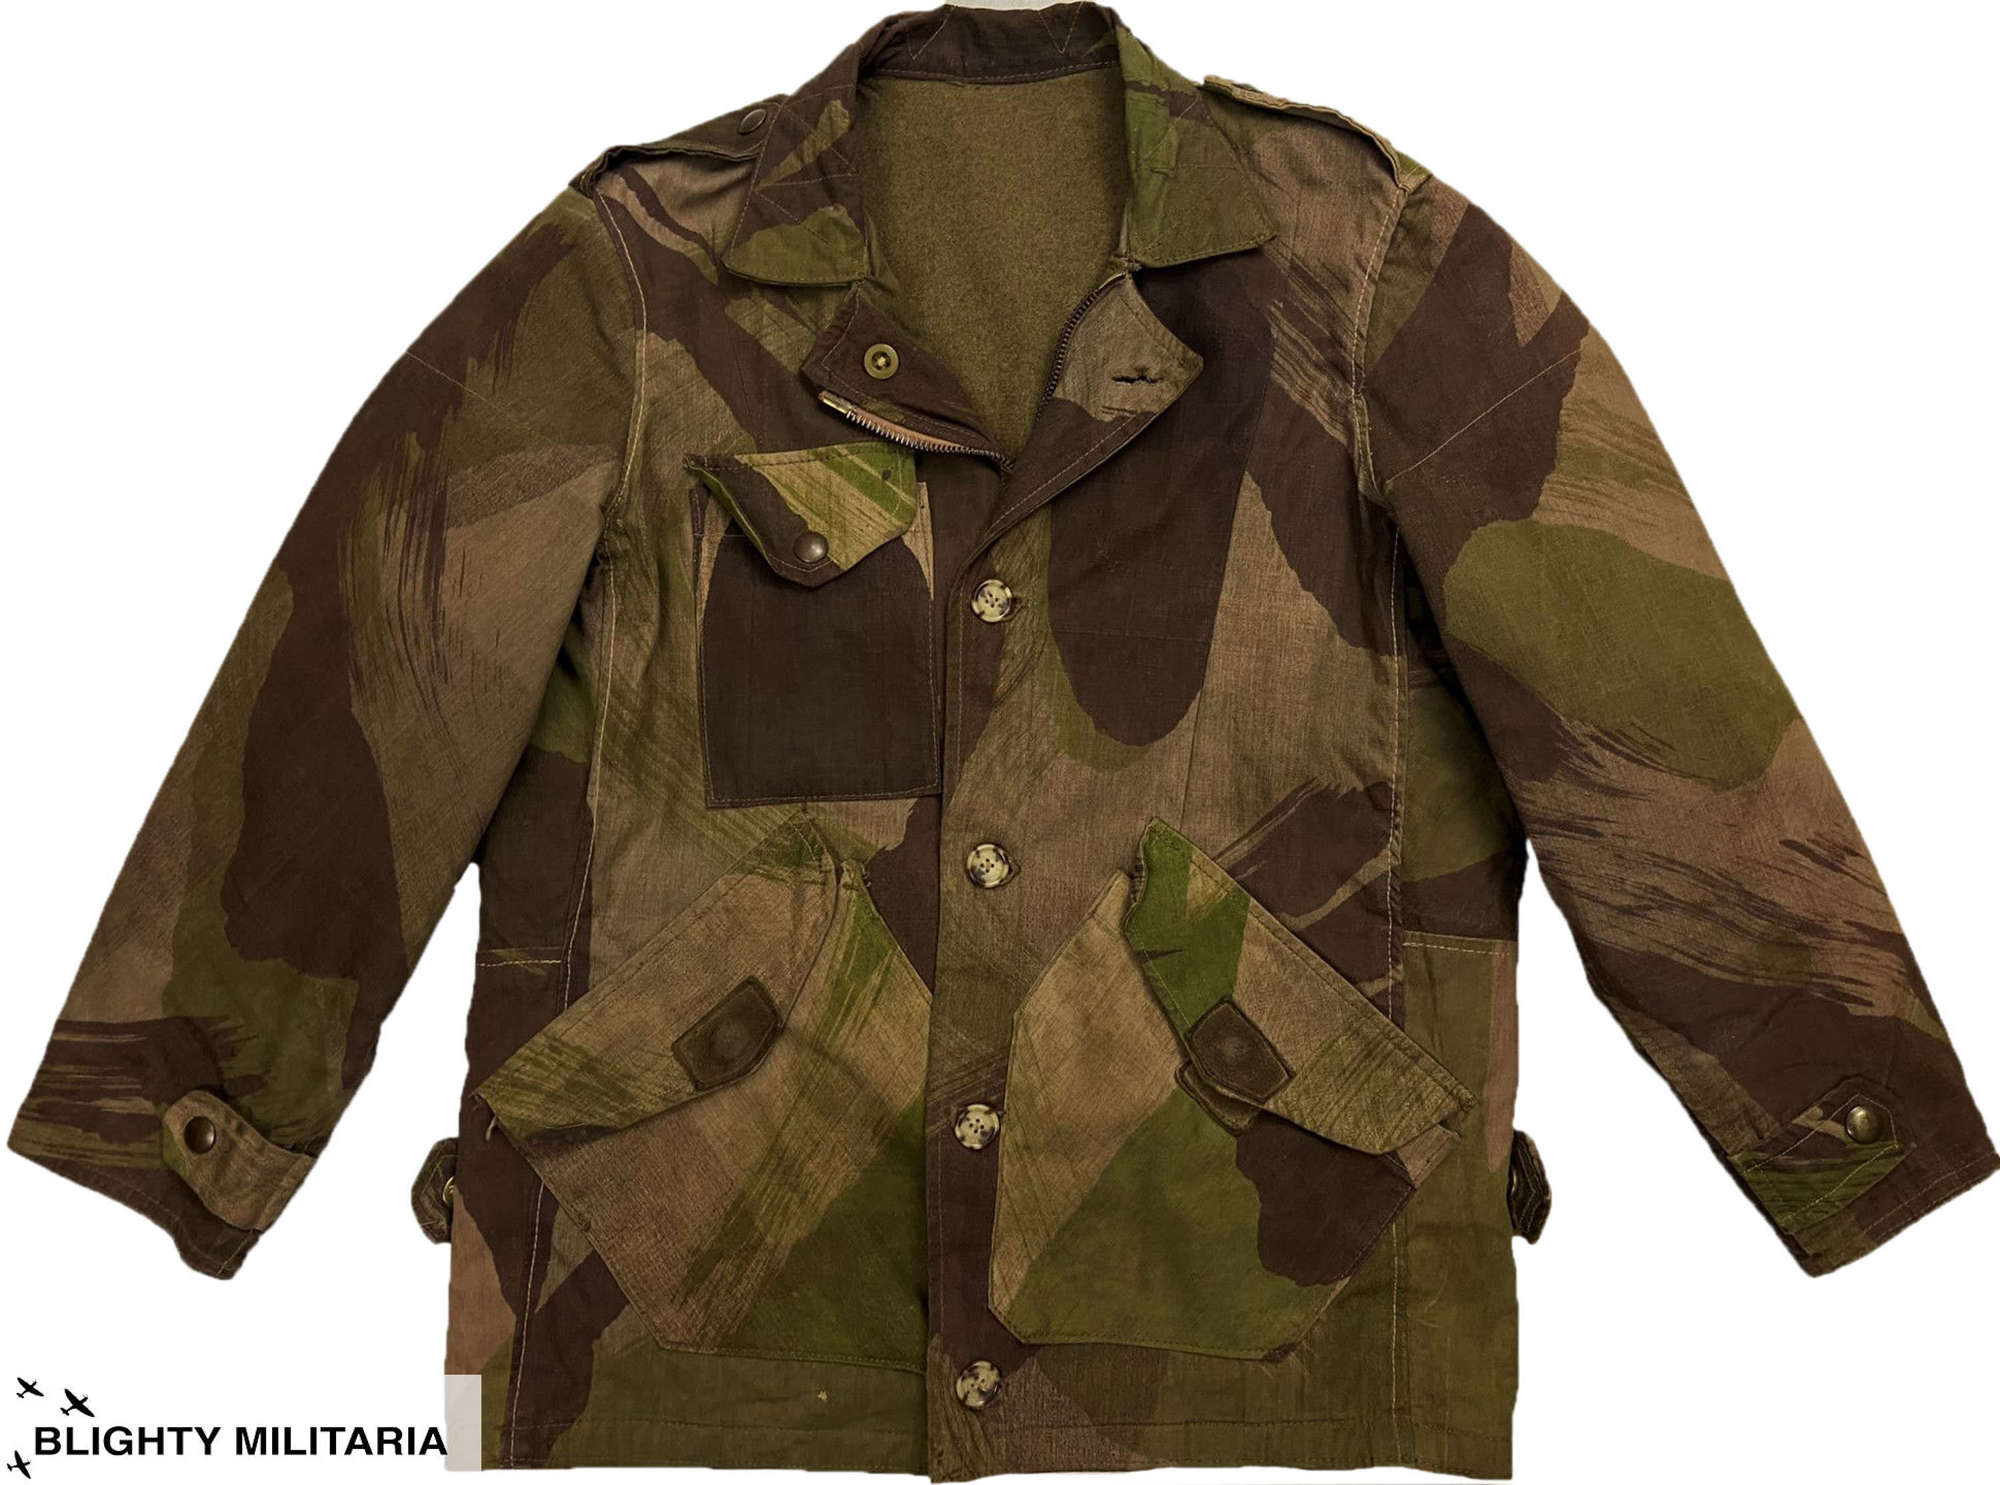 Incredible Cut Down 1944 Dated British Camouflage Tank Suit Jacket